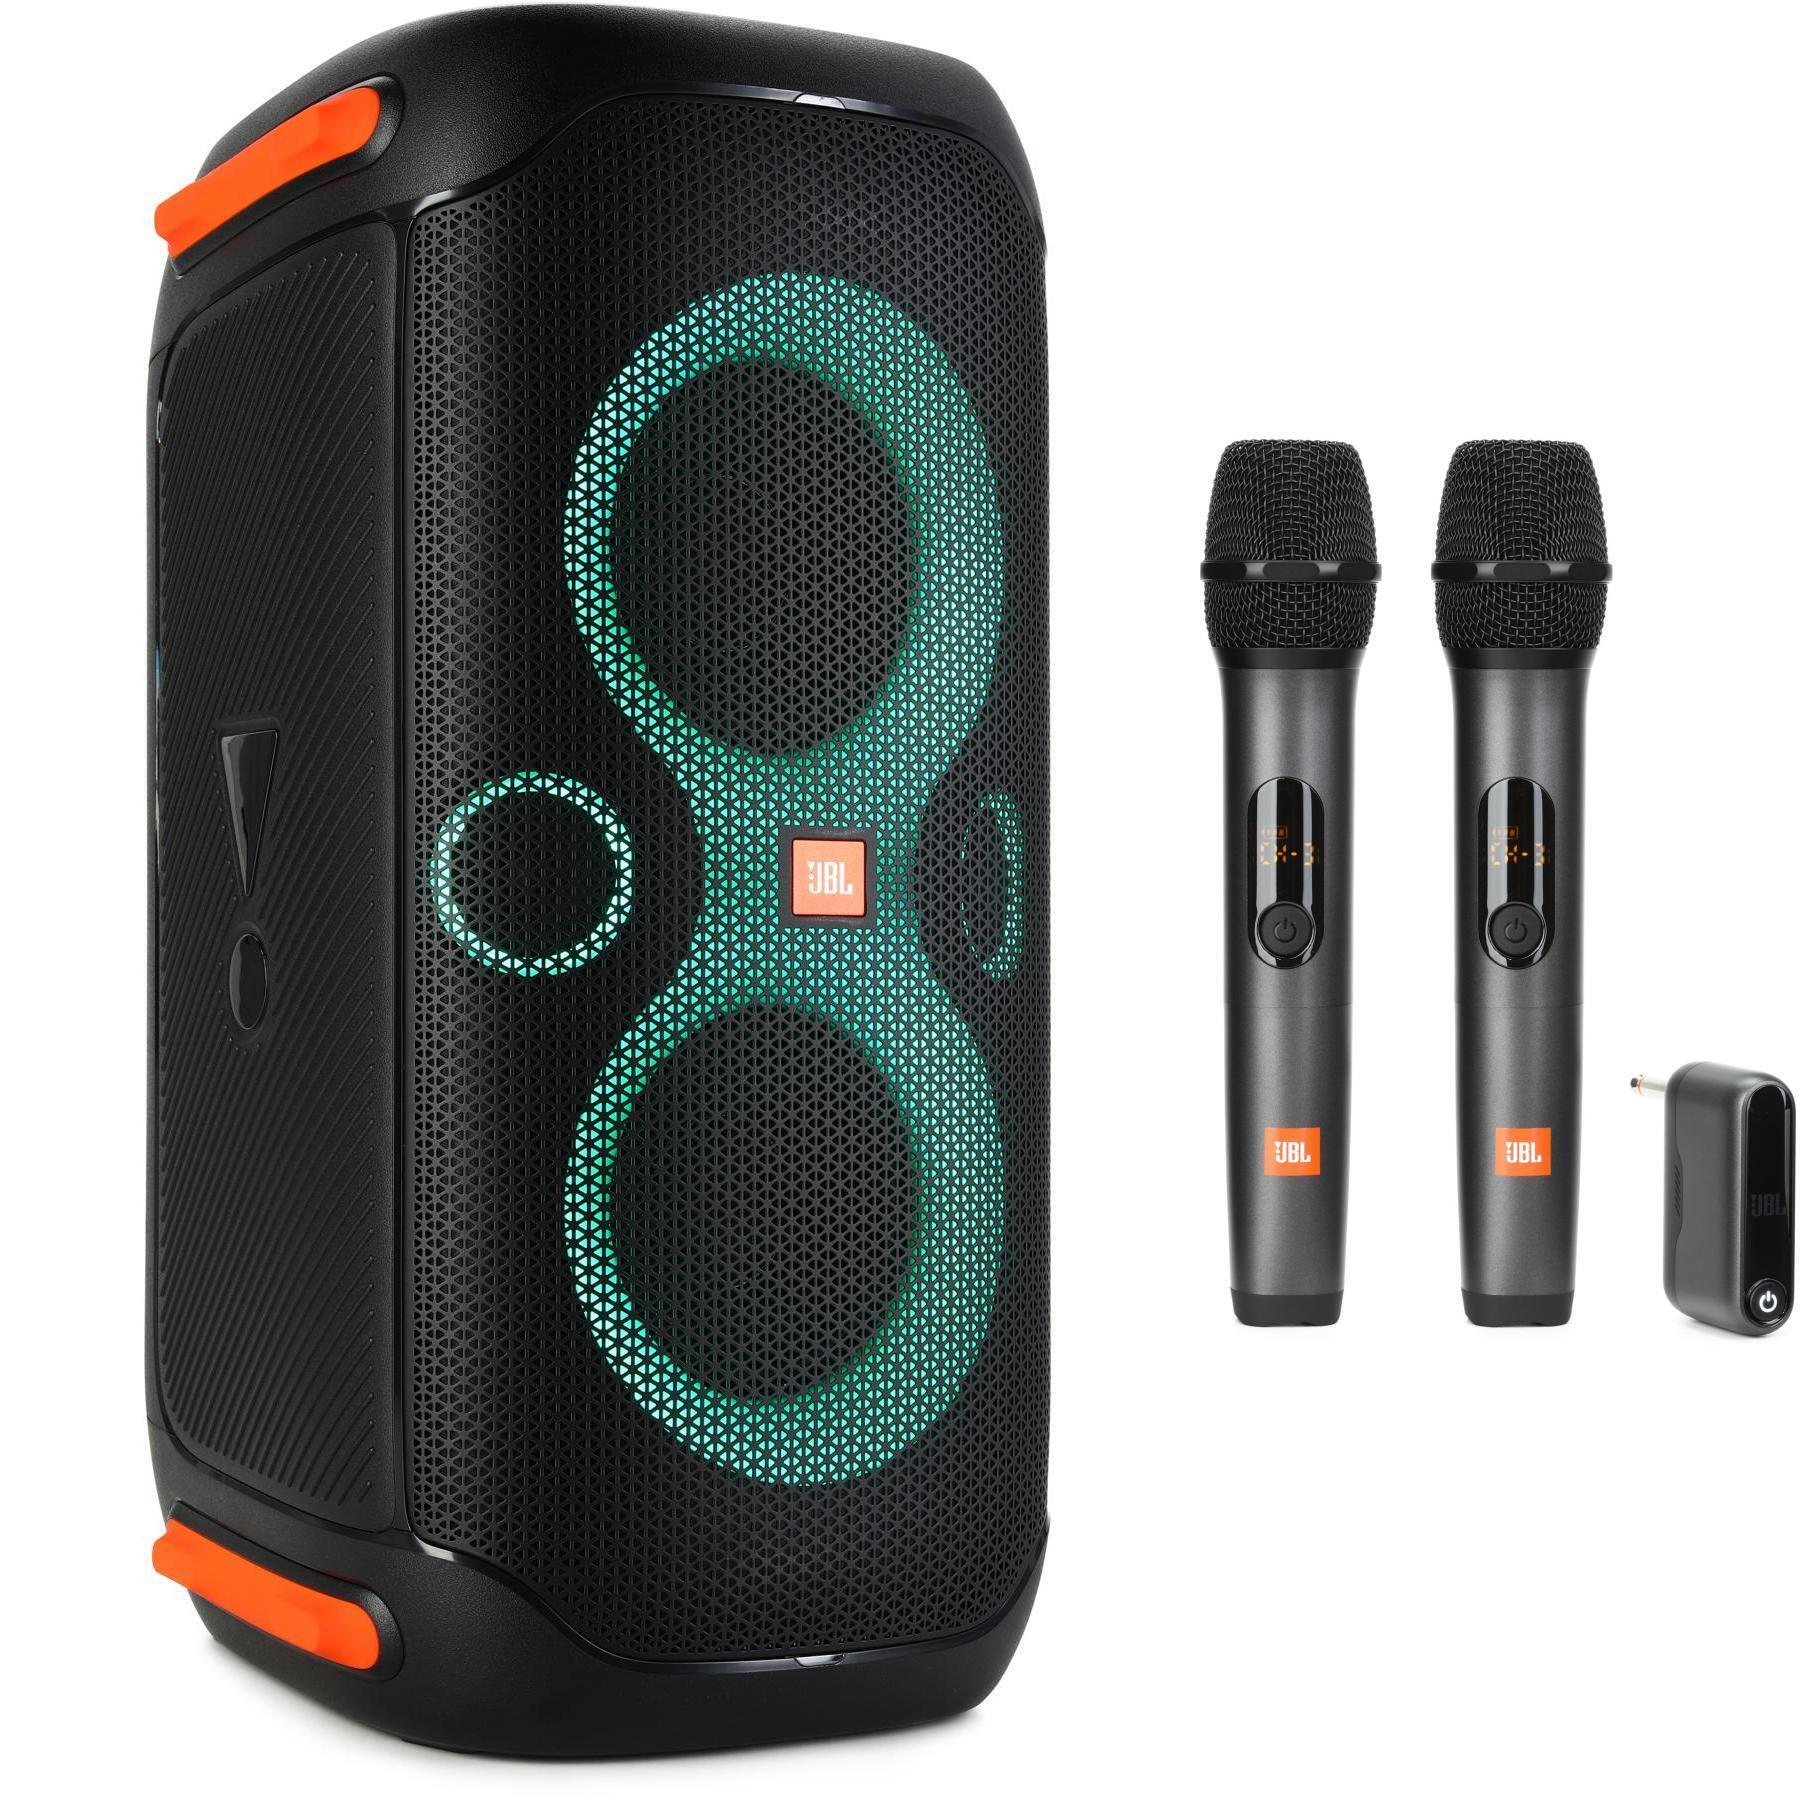  JBL PartyBox 110 160W Portable Wireless Bluetooth Speaker  Bundle with Assorted Cable Ties and Cleaning Cloth : Electronics